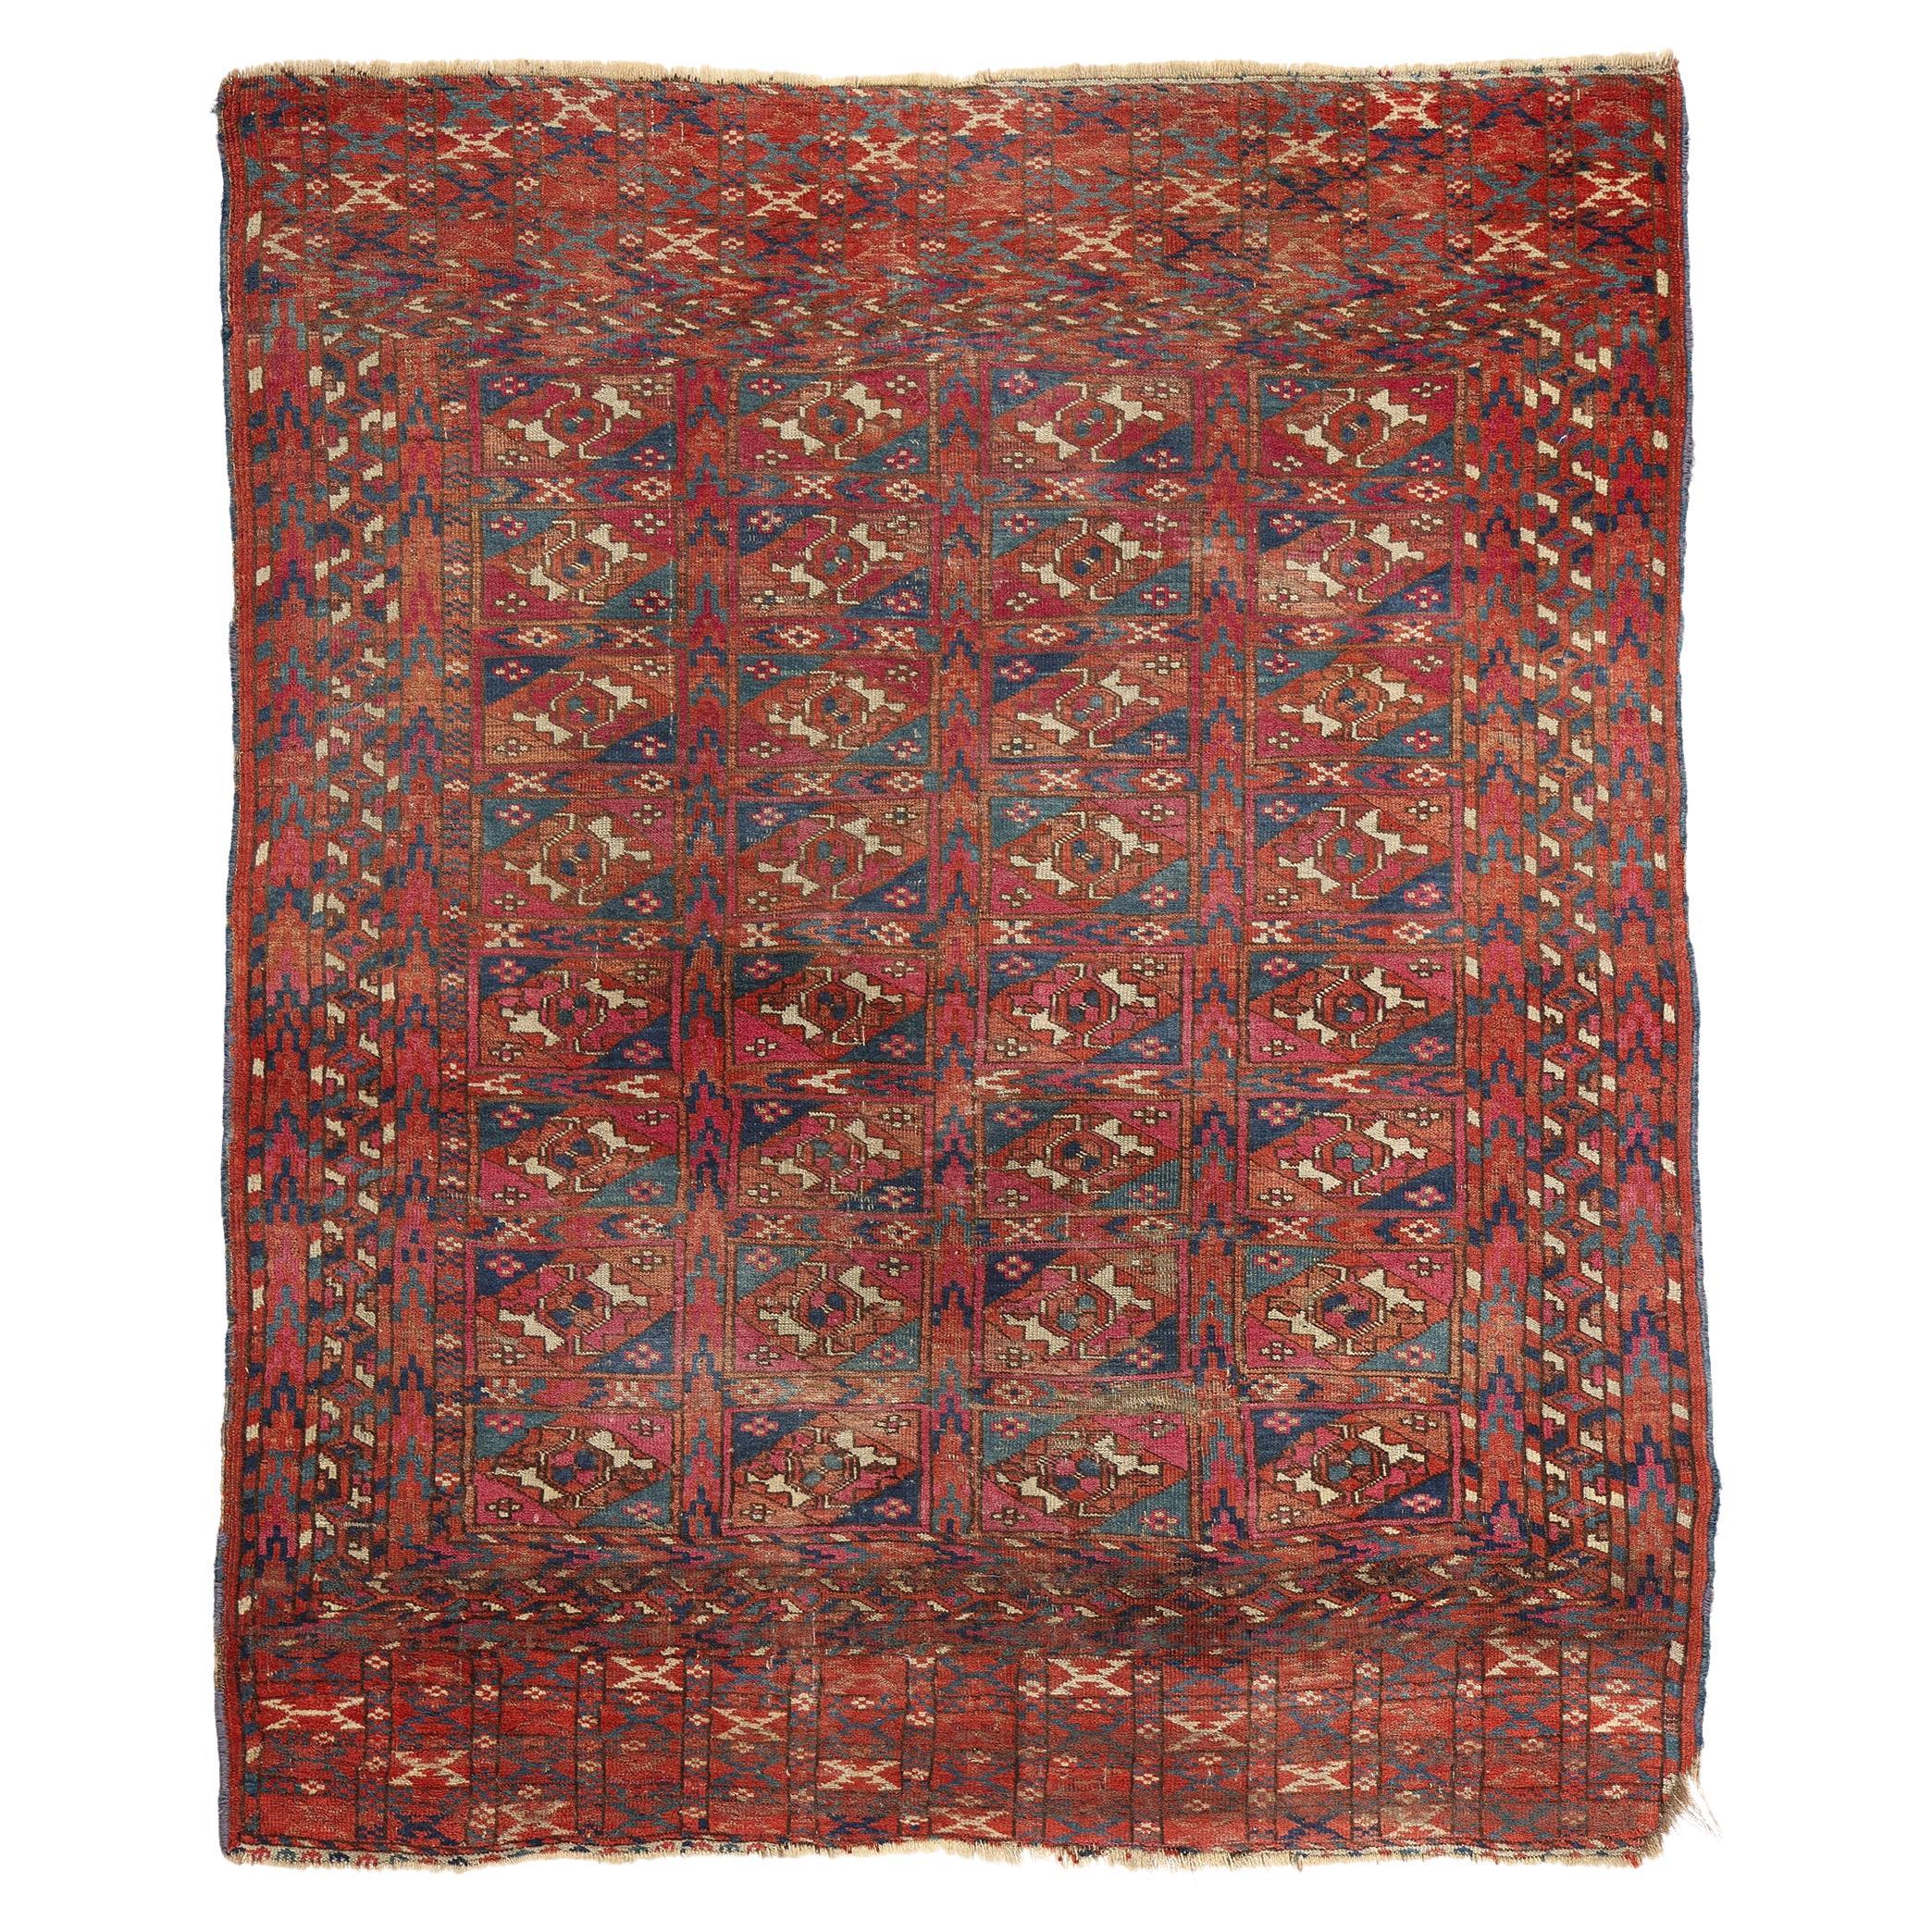 Late 19th Century Distressed Antique Turkoman Tribe Chuval Tekke Tribal Carpet  For Sale